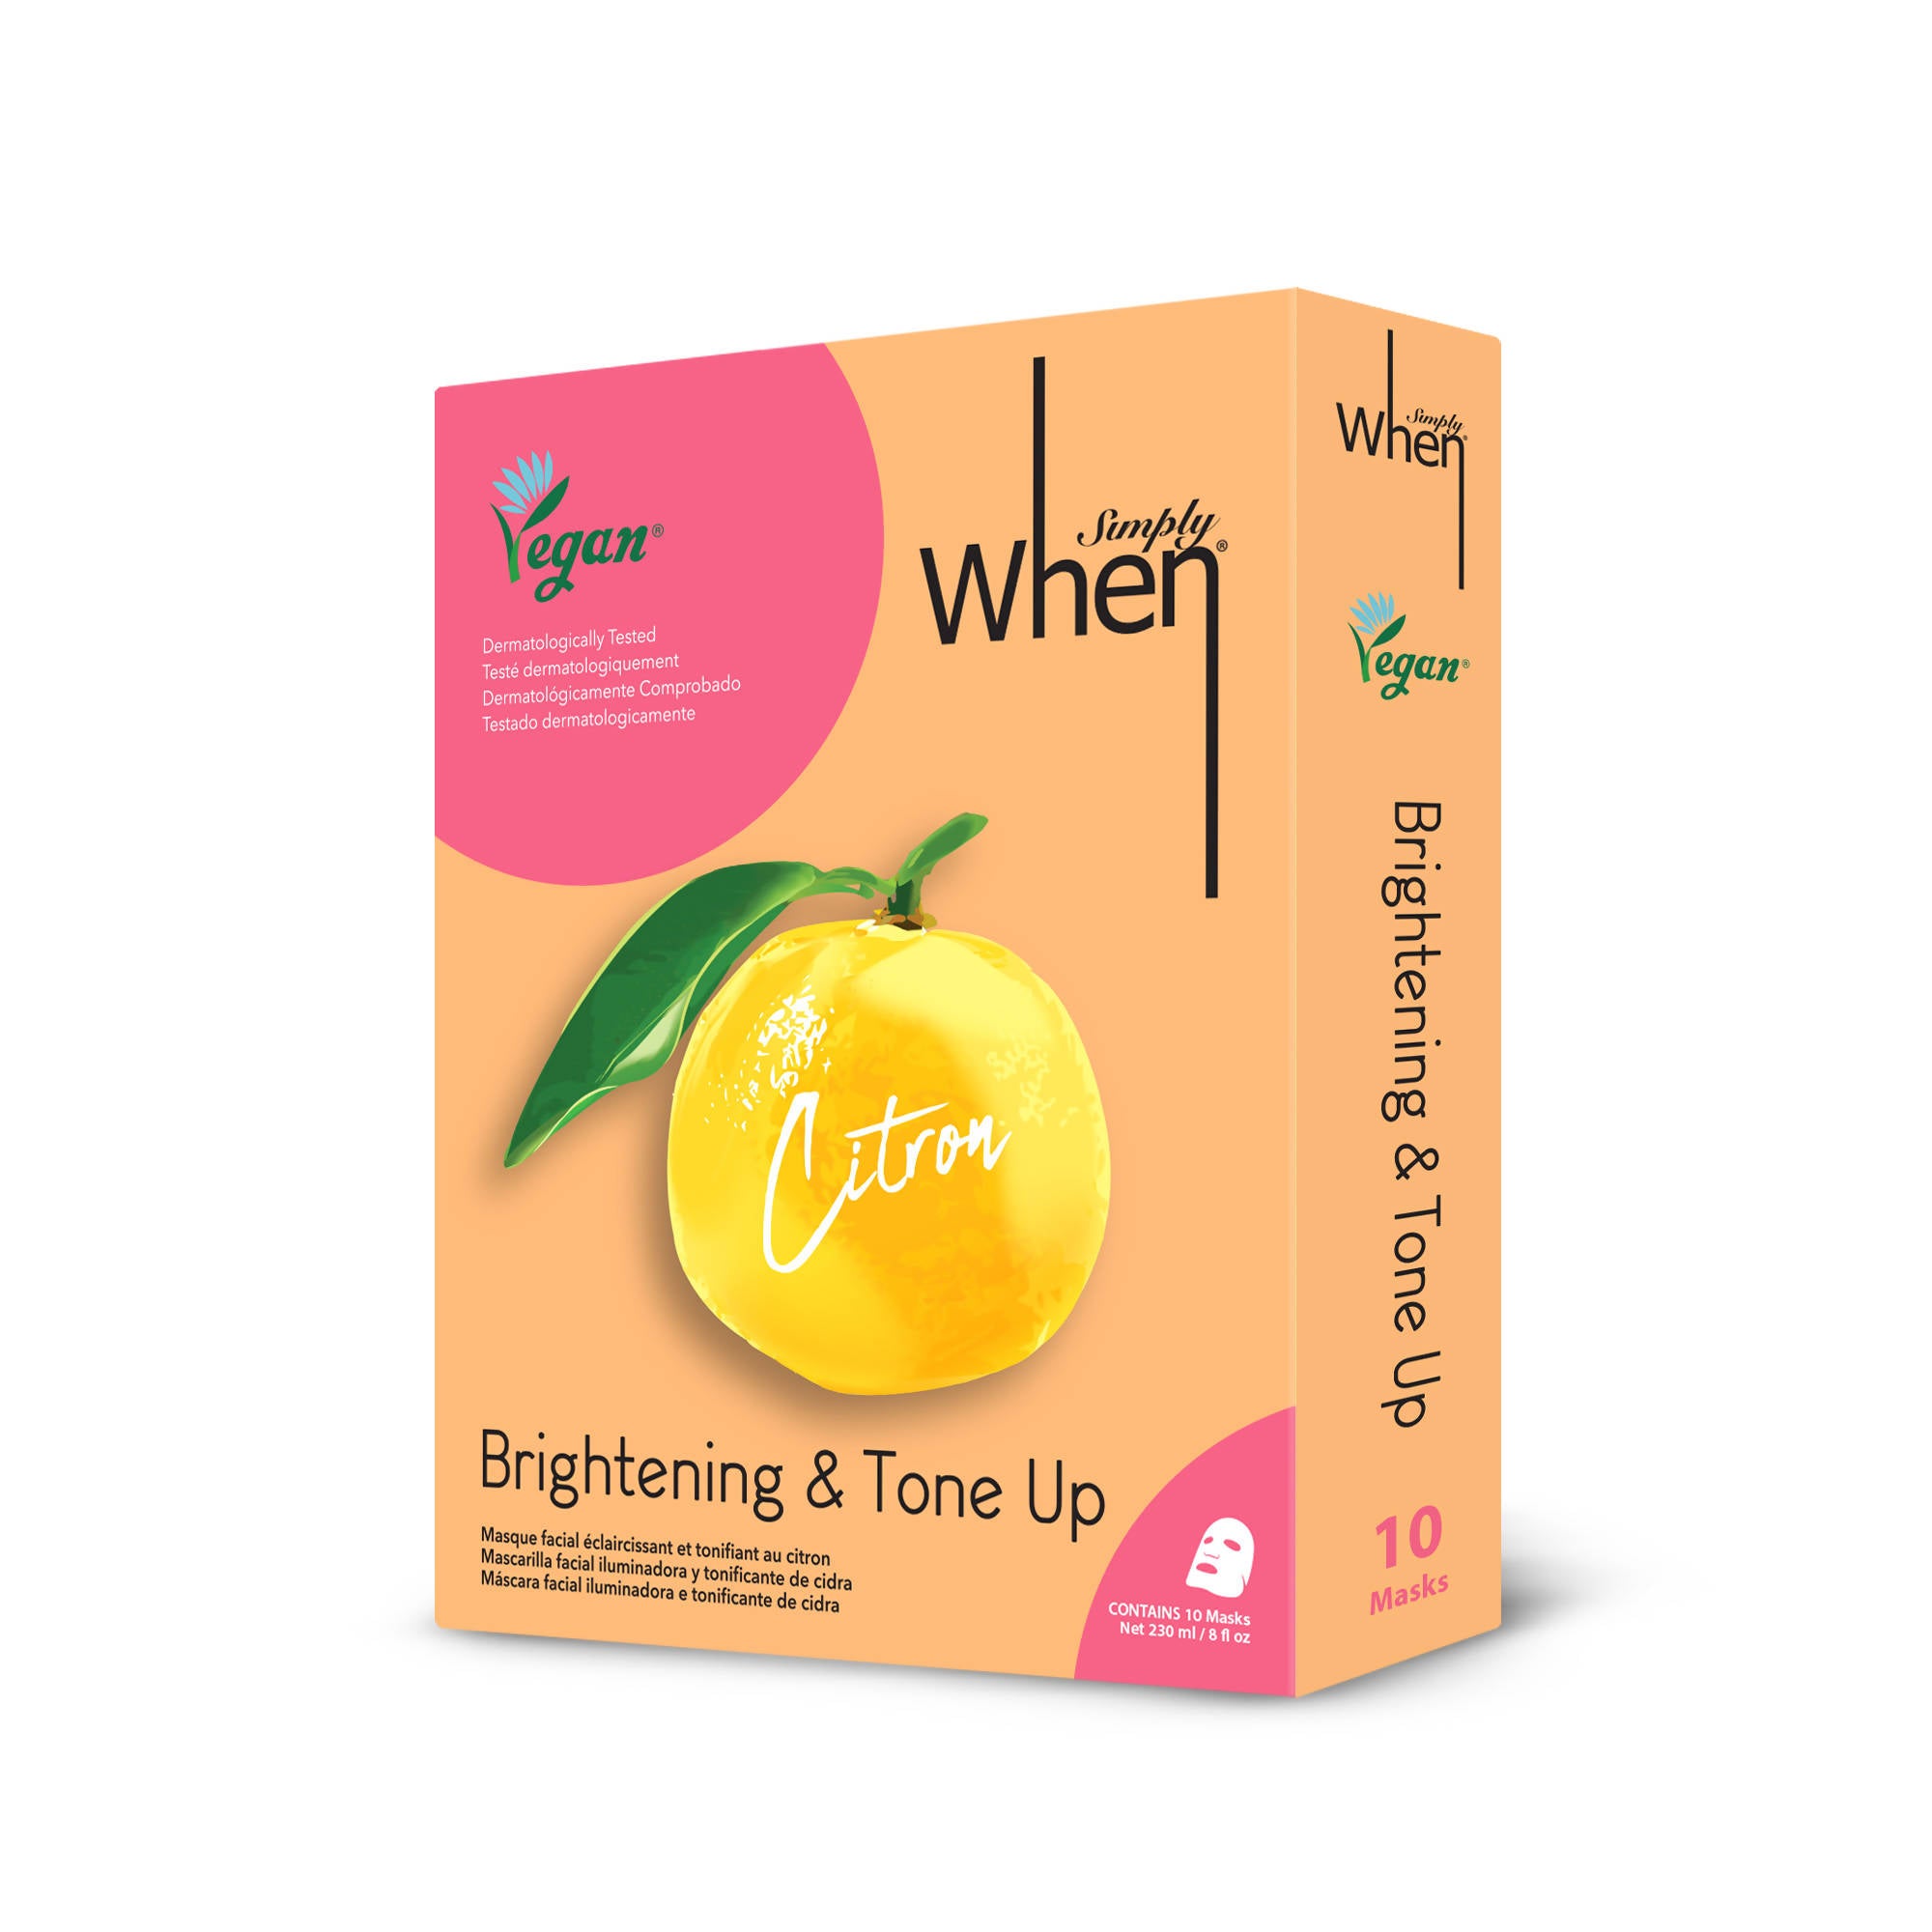 [Simply When Vegan] Citron Brightening & Tone Up Mask (10 pack)